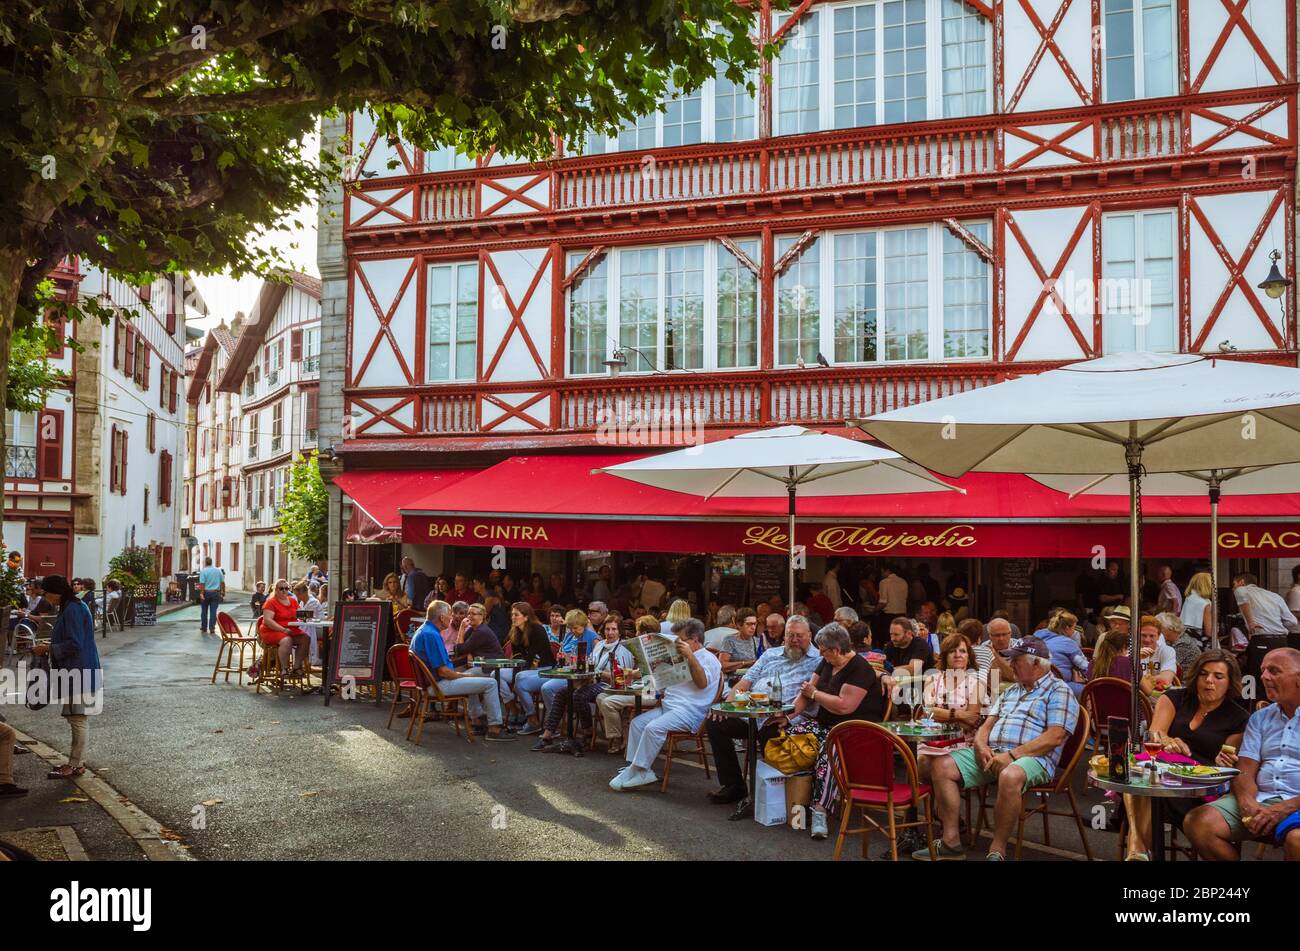 Saint Jean de Luz, French Basque Country, France - July 13th, 2019 : People sit at the outdoor terrace of the Cafe Majestic in the Place Louis XIV squ Stock Photo